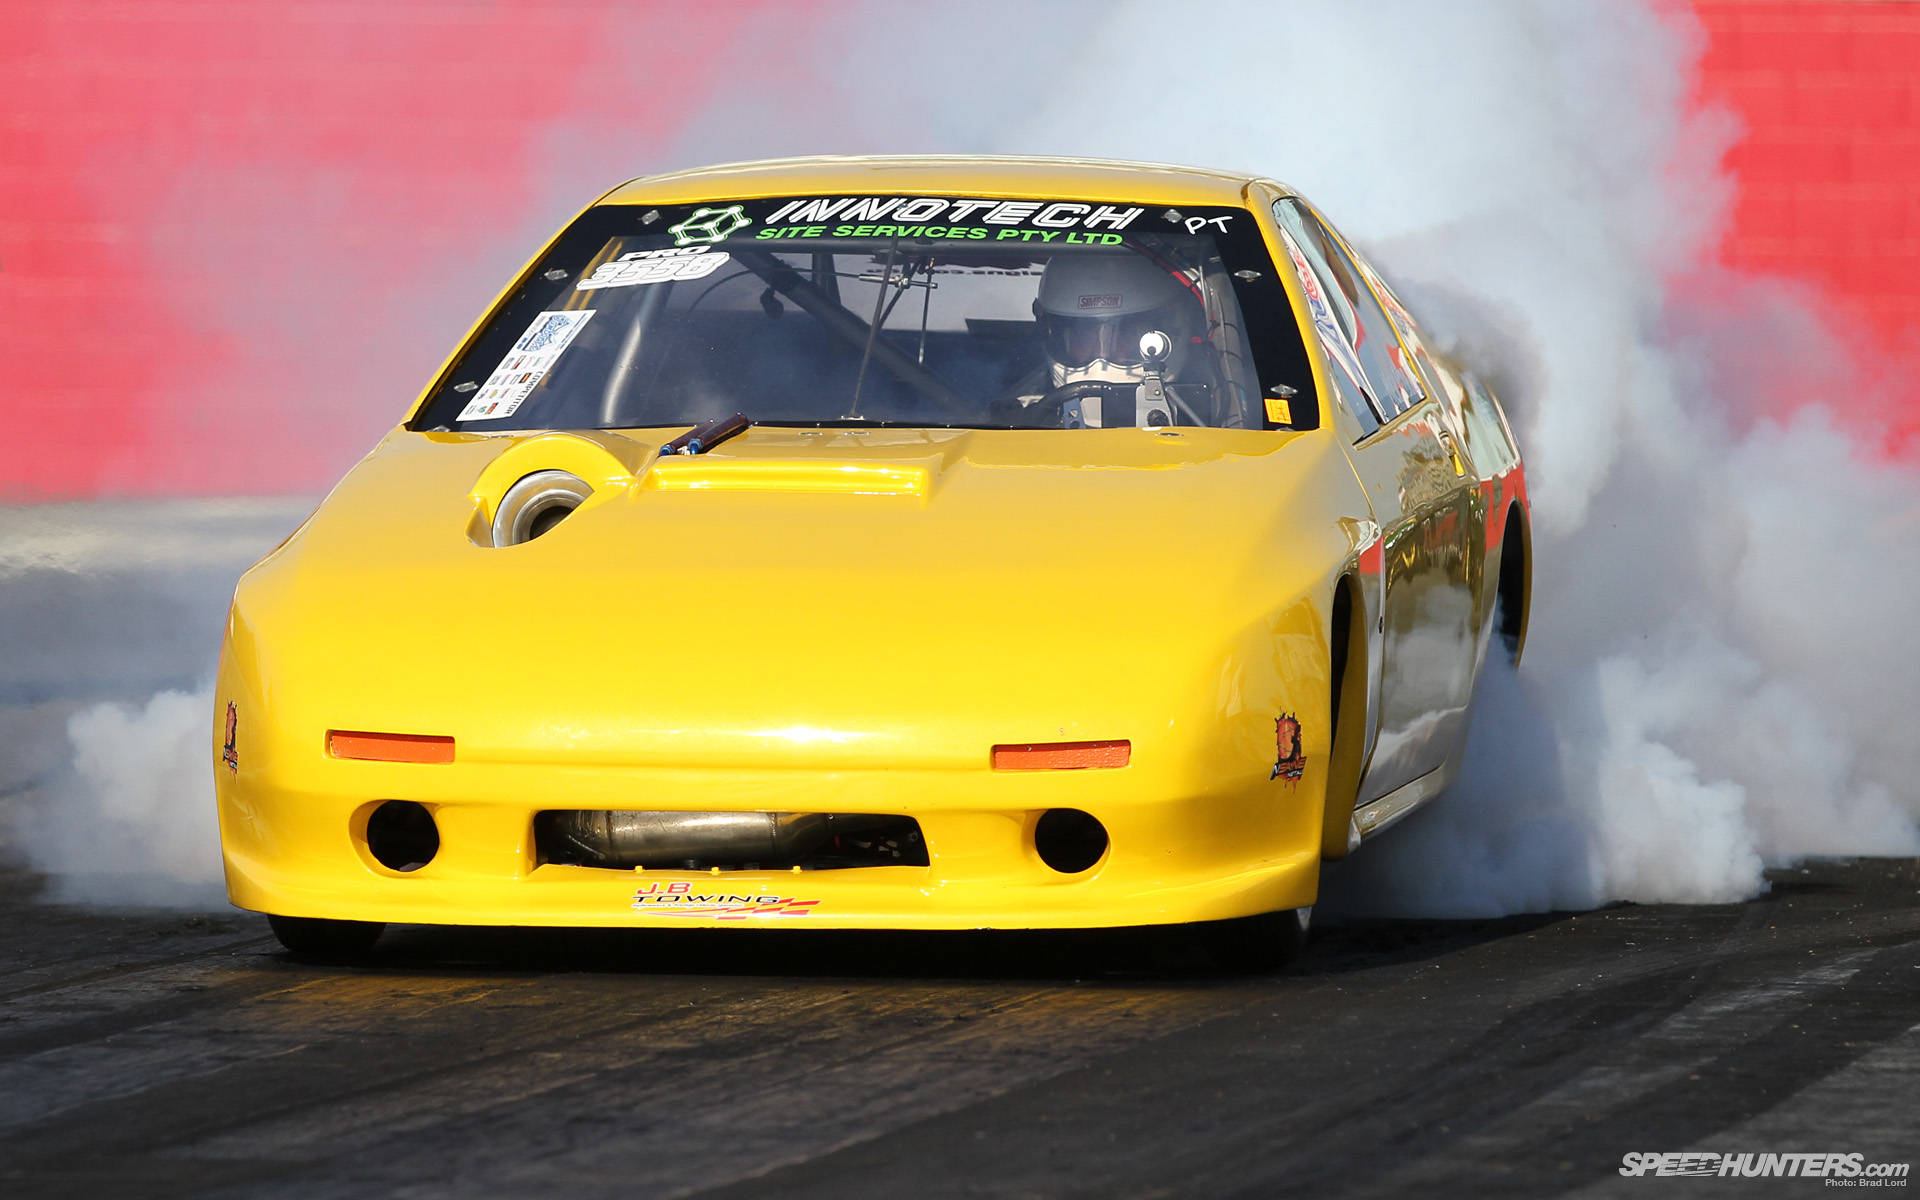 High-intensity Drag Racing With Yellow Mazda Rx-7 Background